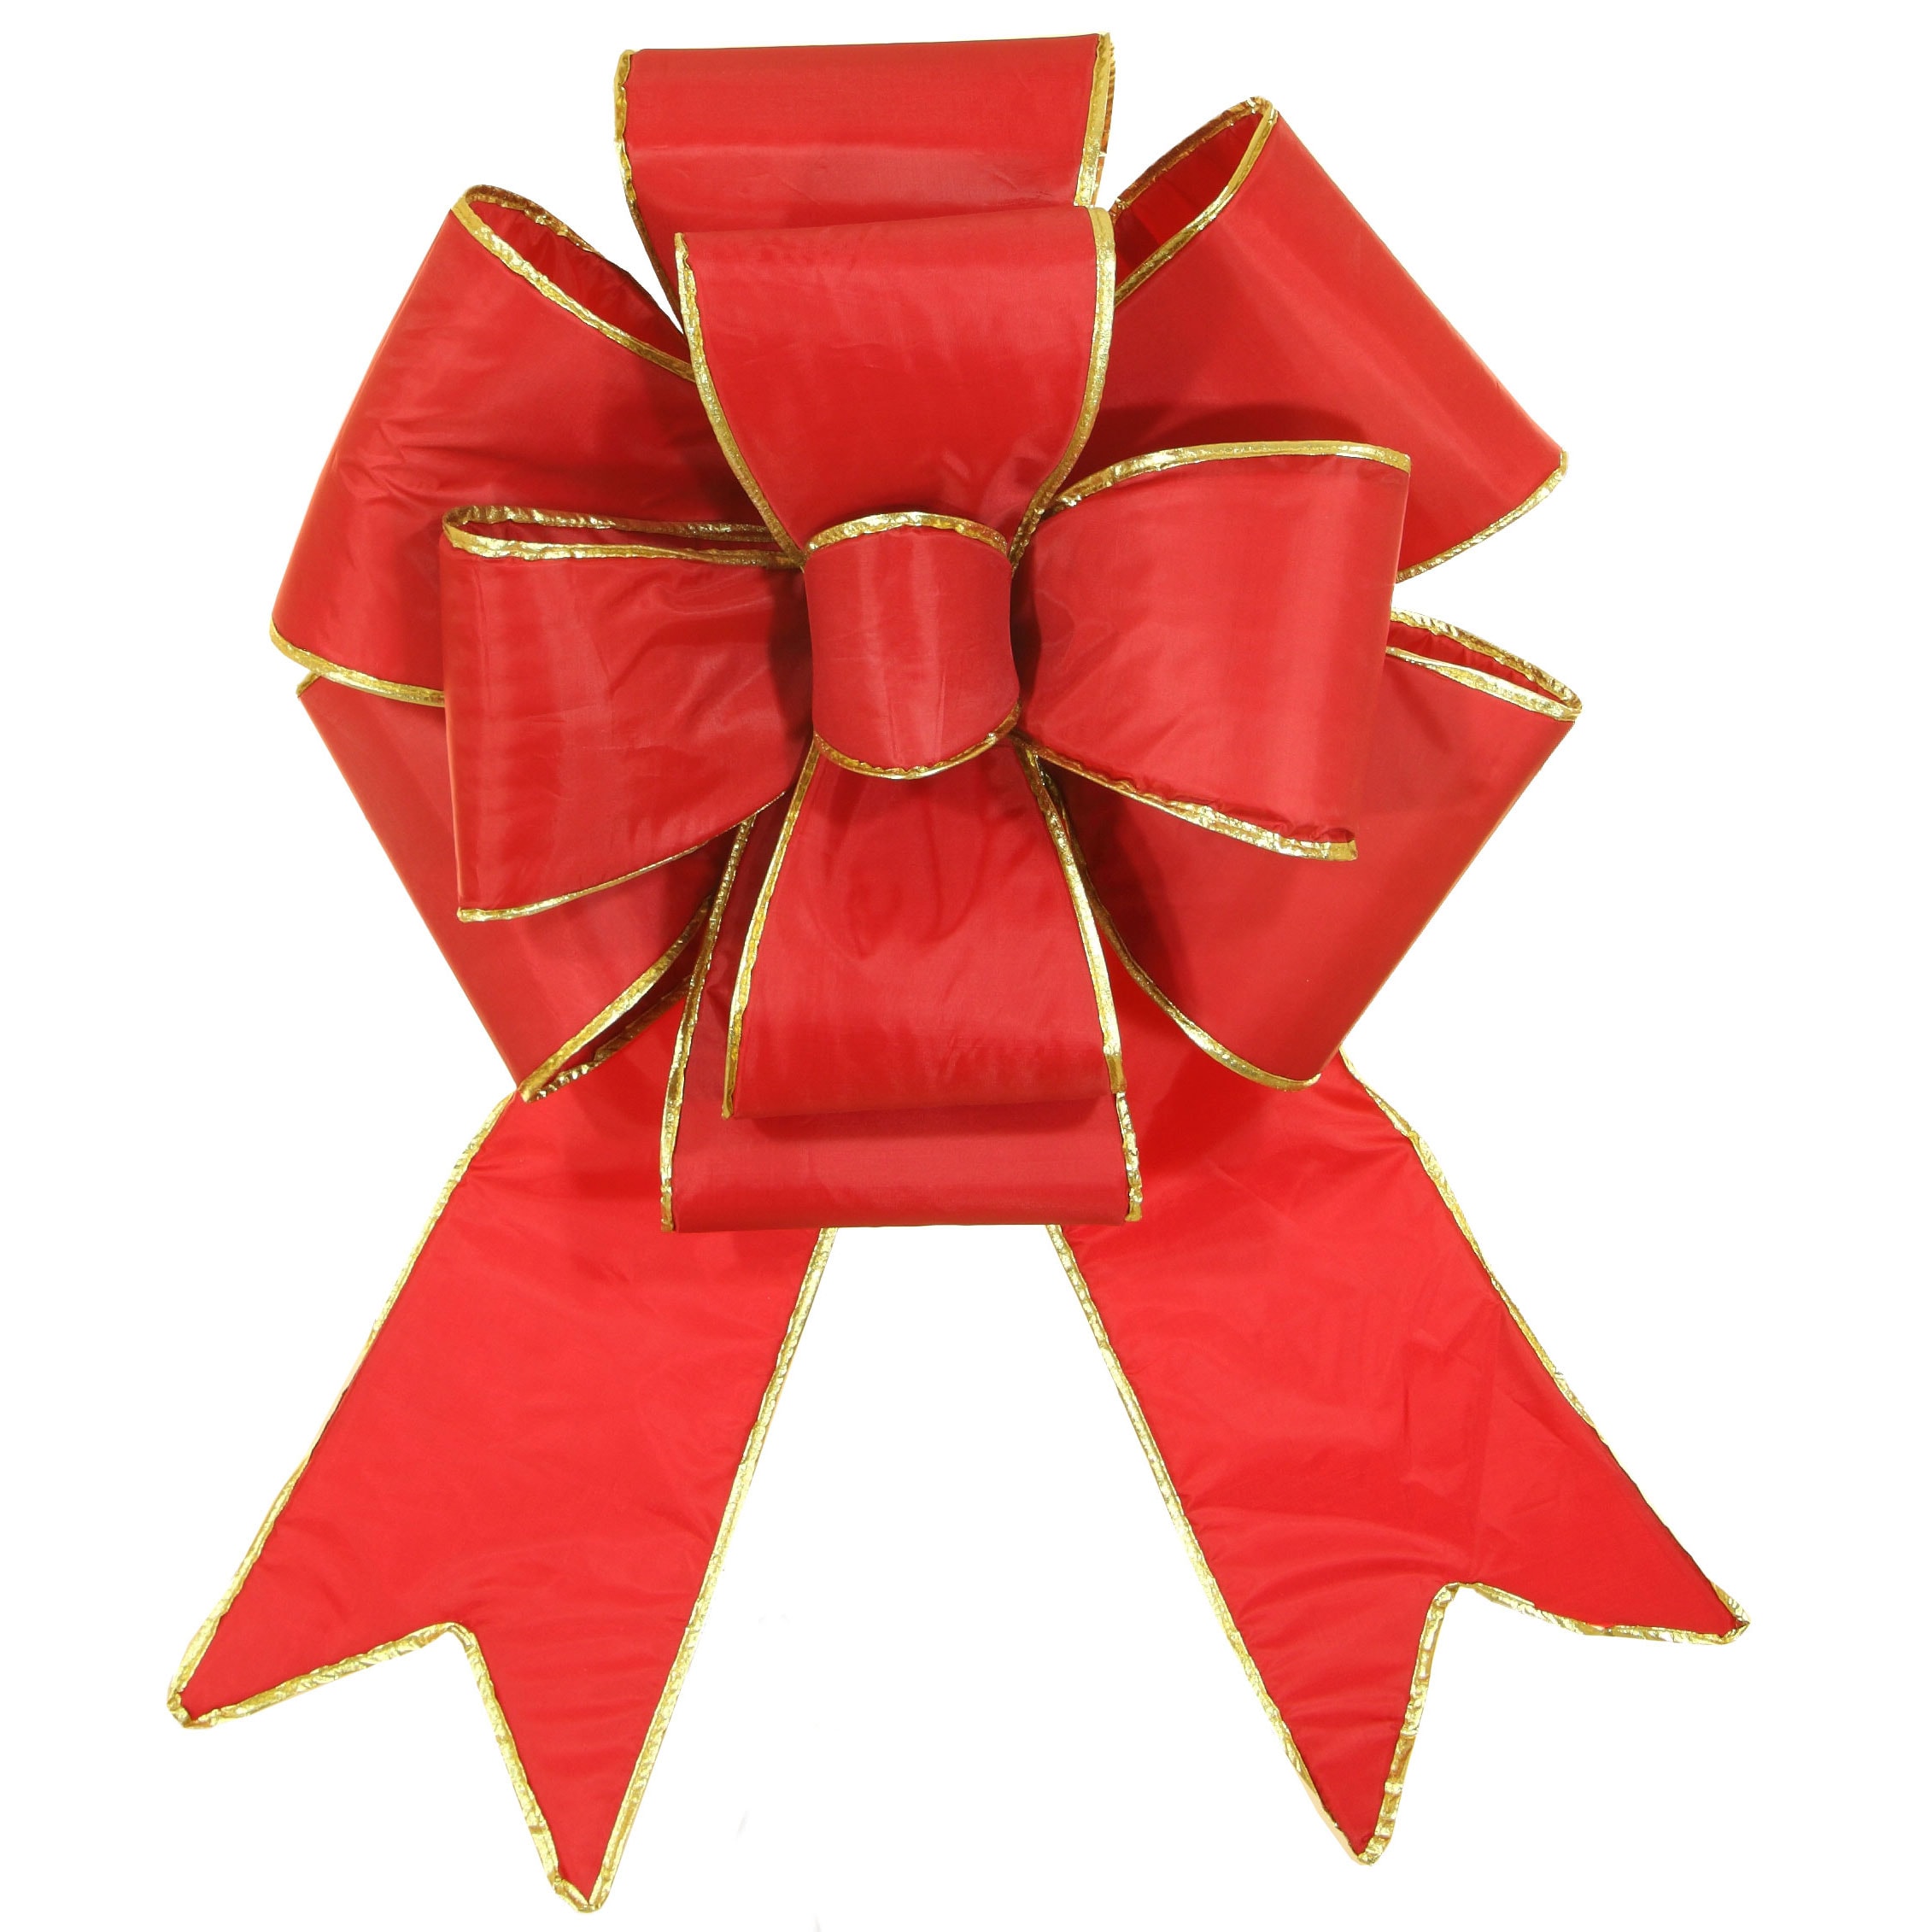 Red Bow with Gold Trim 12